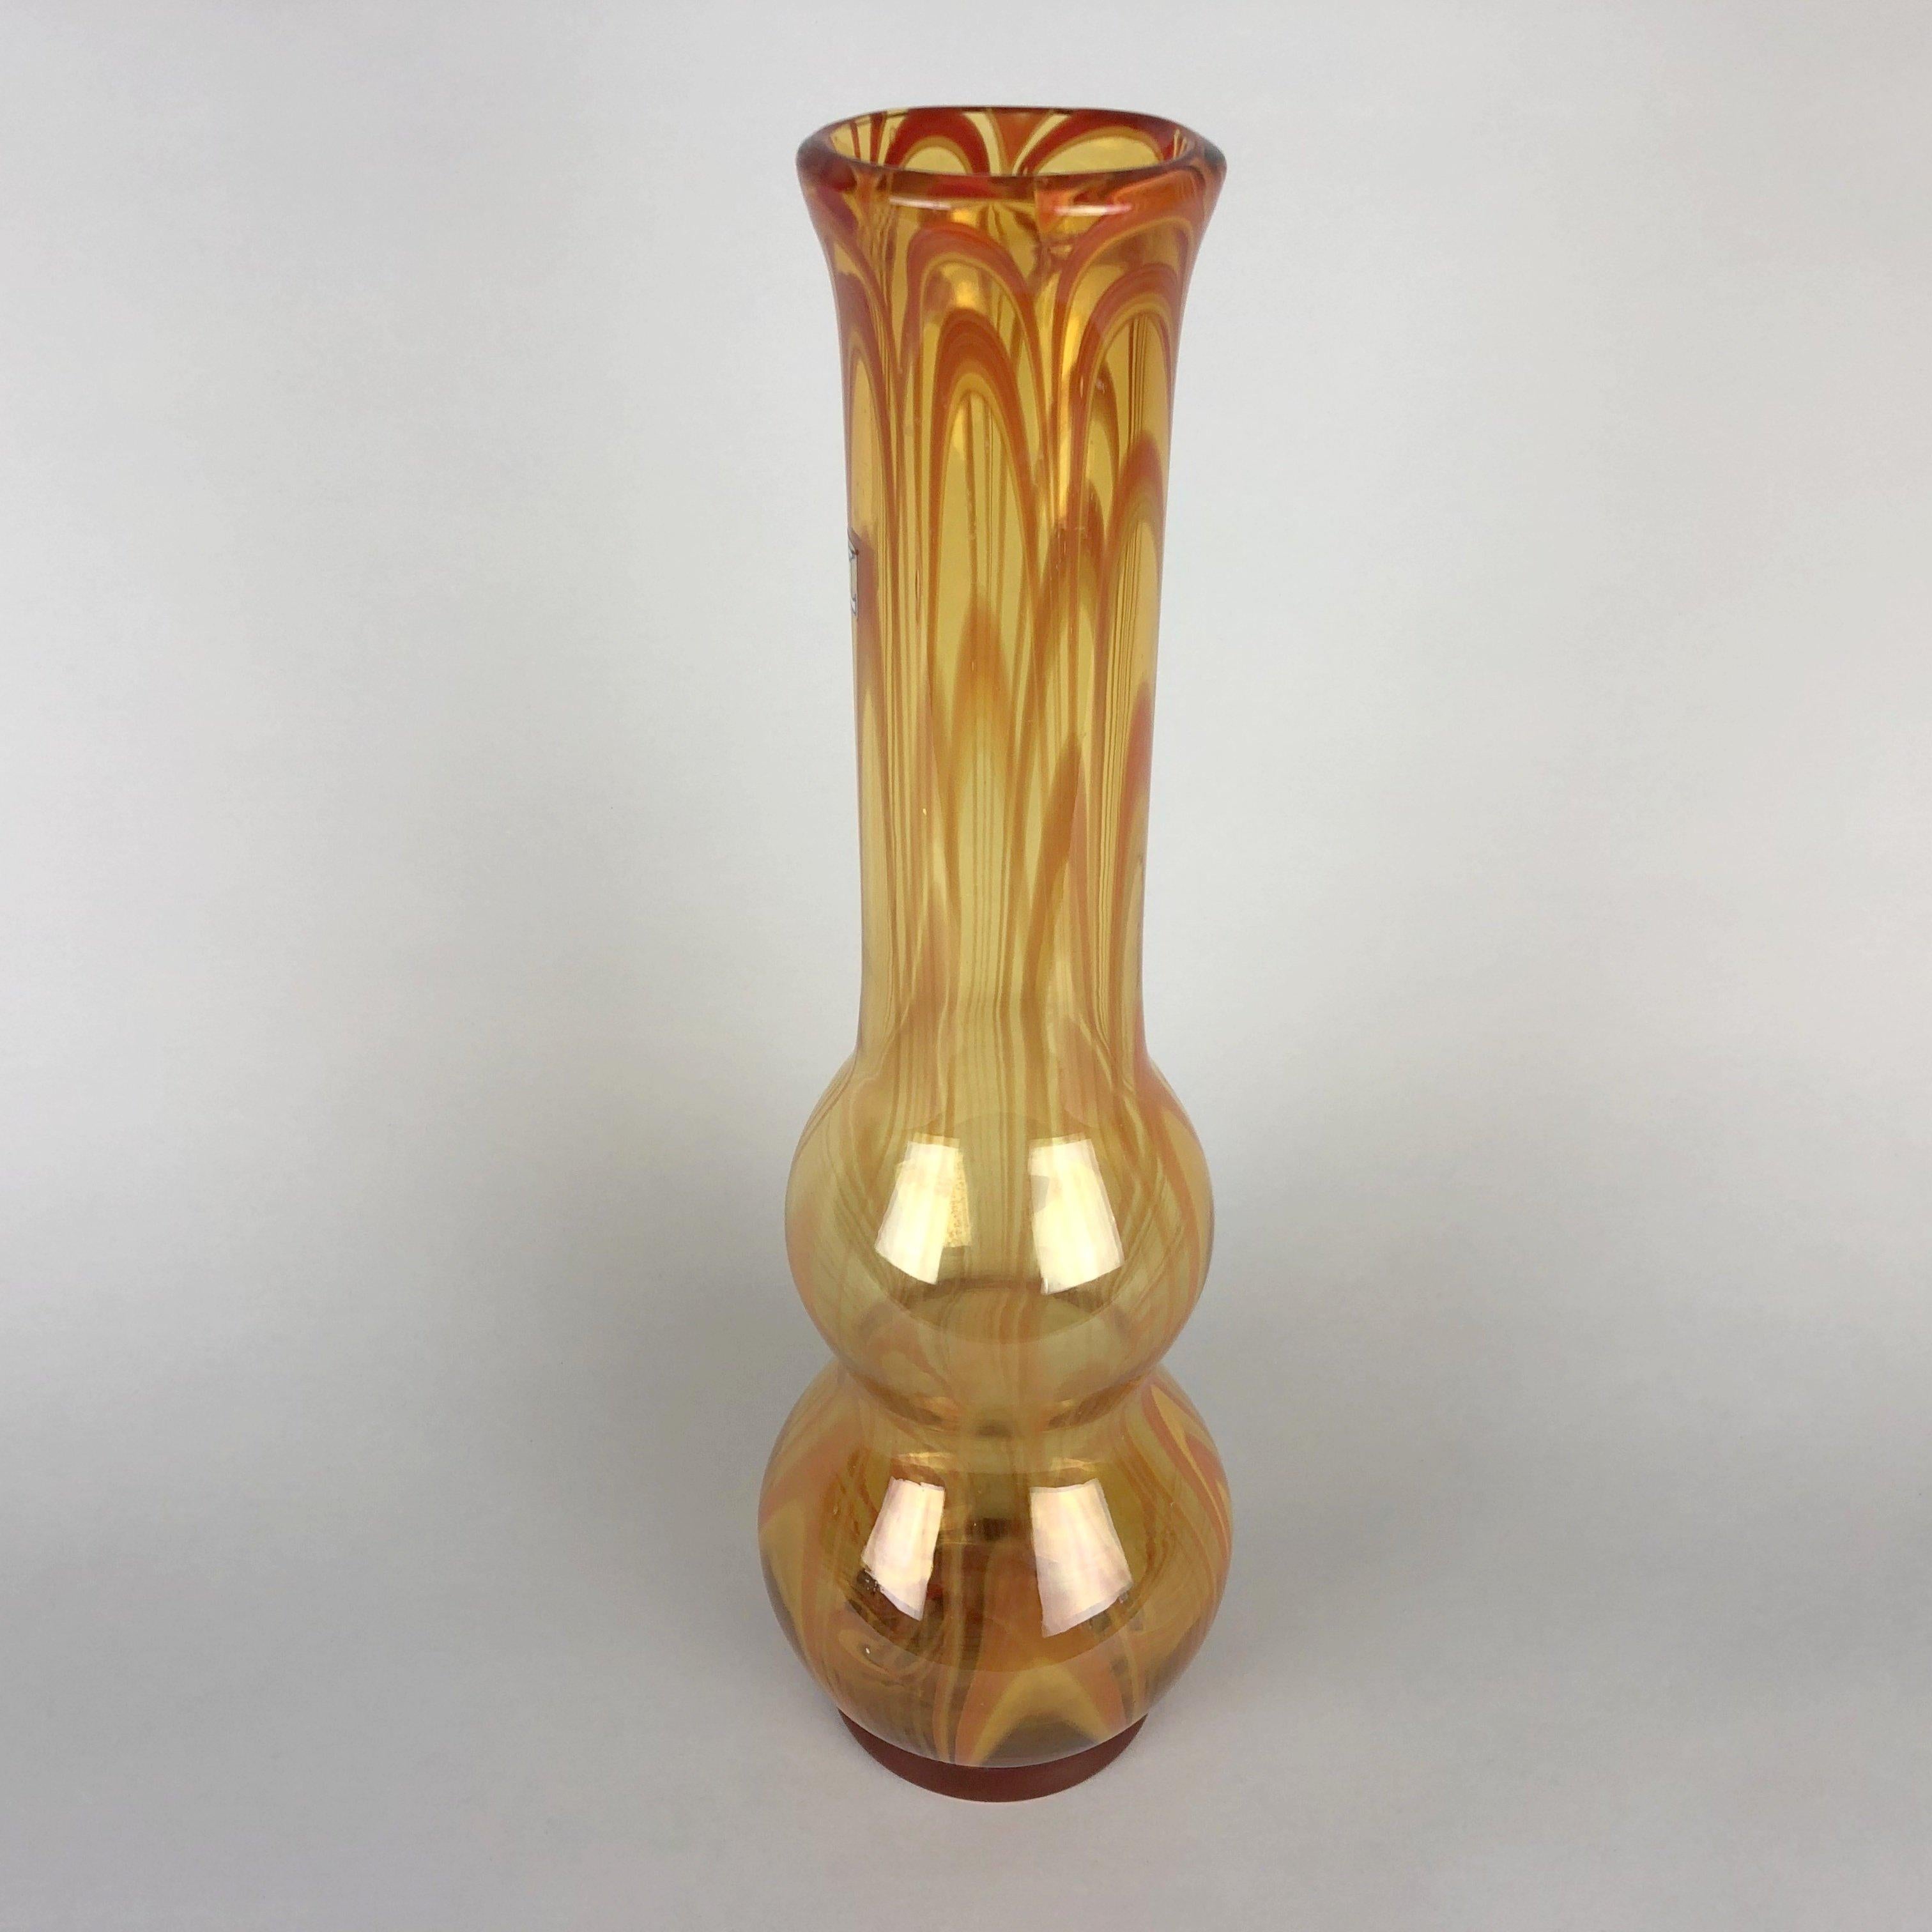 Tall hand made vintage glass vase made by the Laura Glassworks in the city of Tarnów in Poland in the 1970s. Very good vintage condition with it's original Label. Beautiful honey colour.